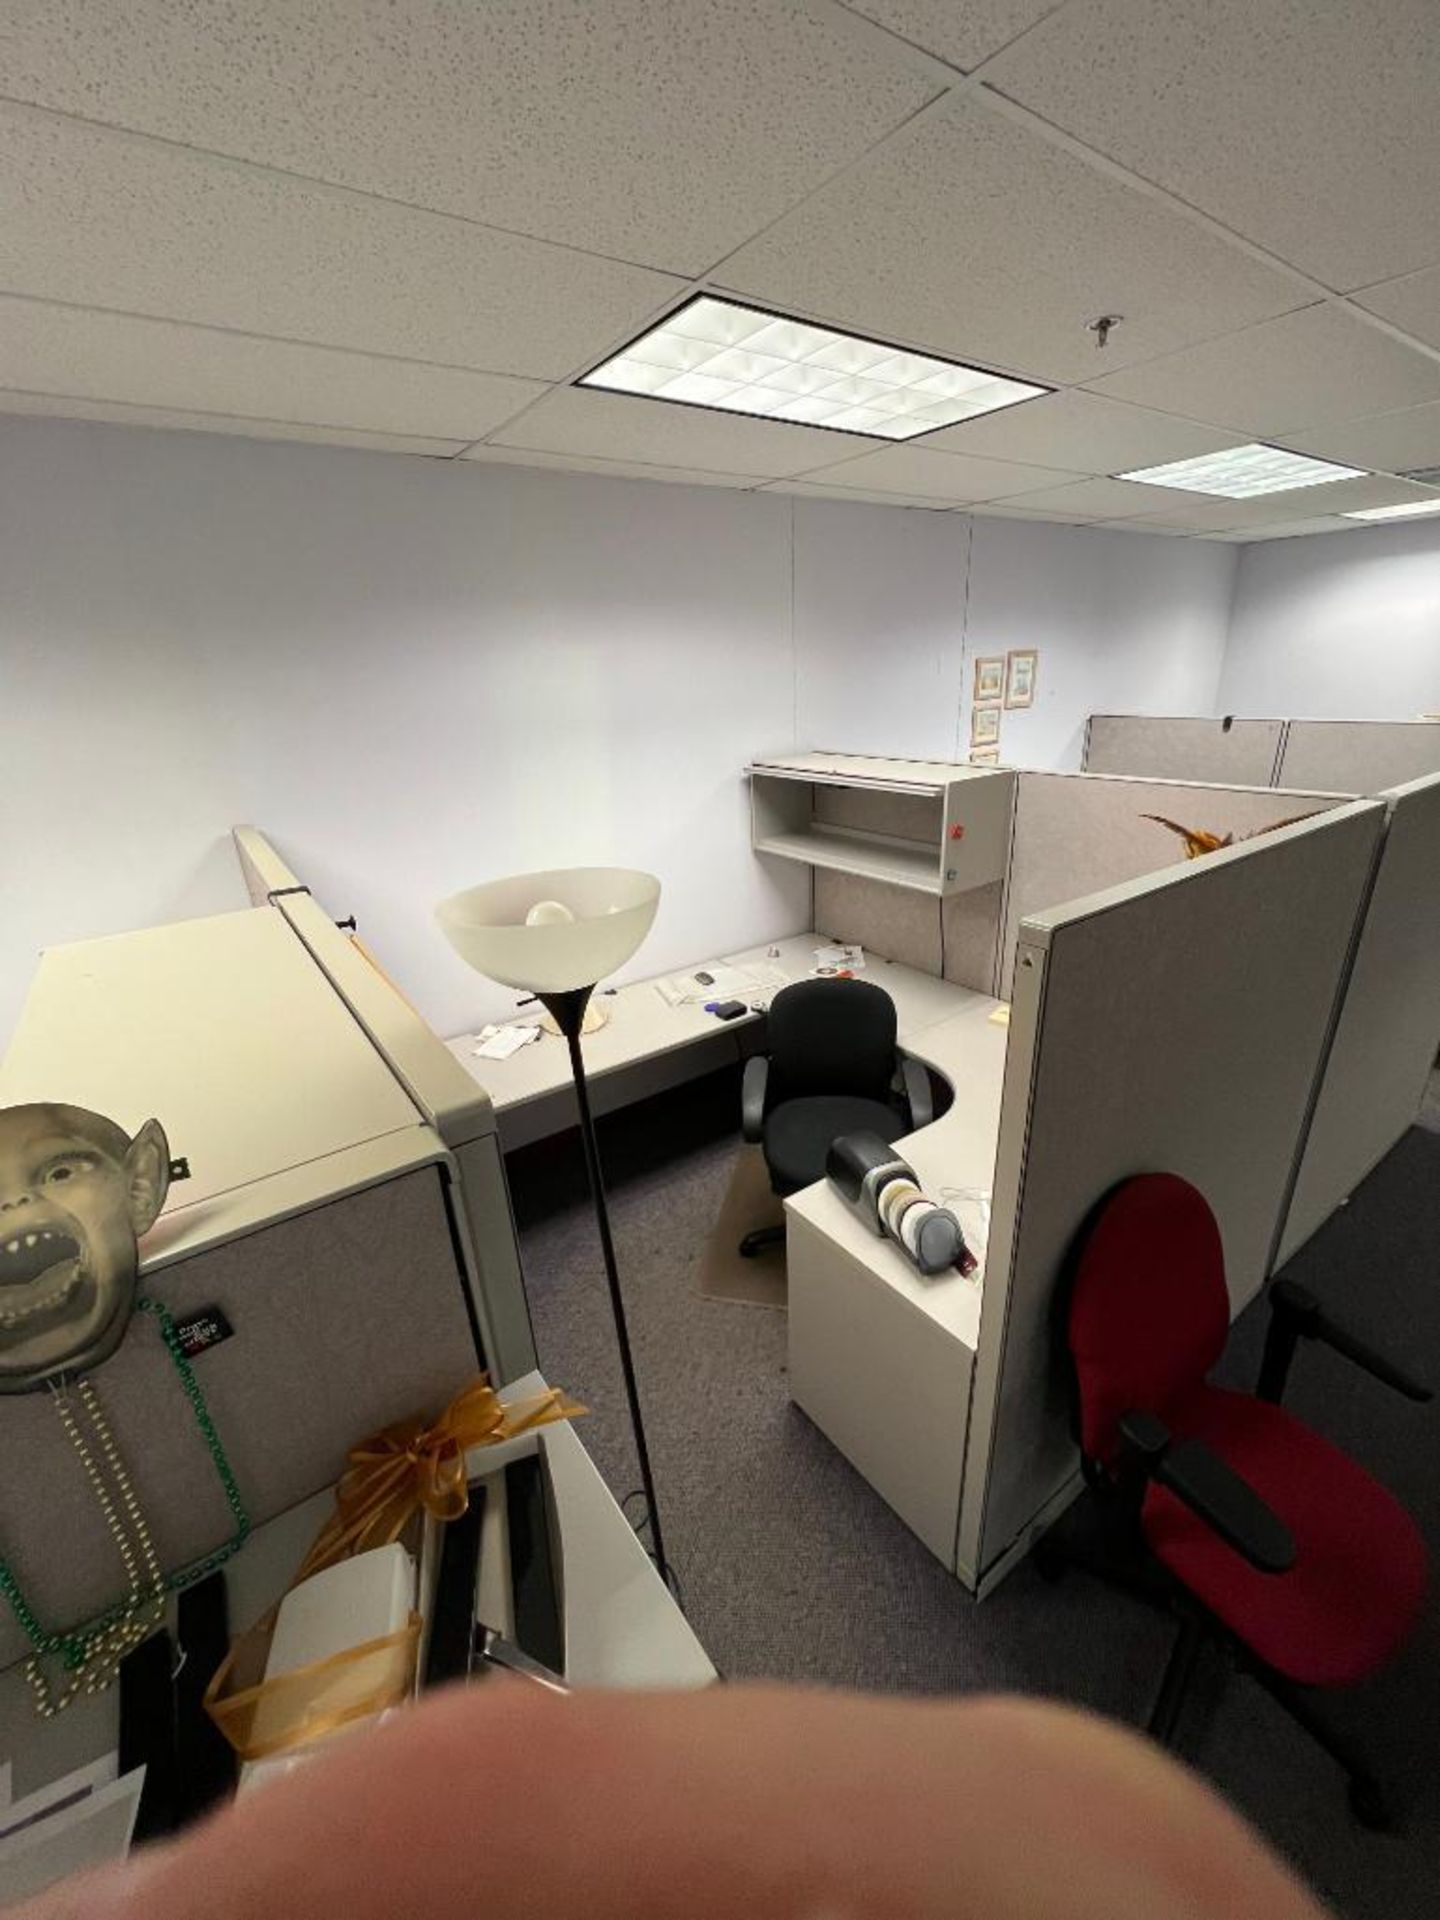 Lot of (7) Office Cubicles - Image 7 of 7